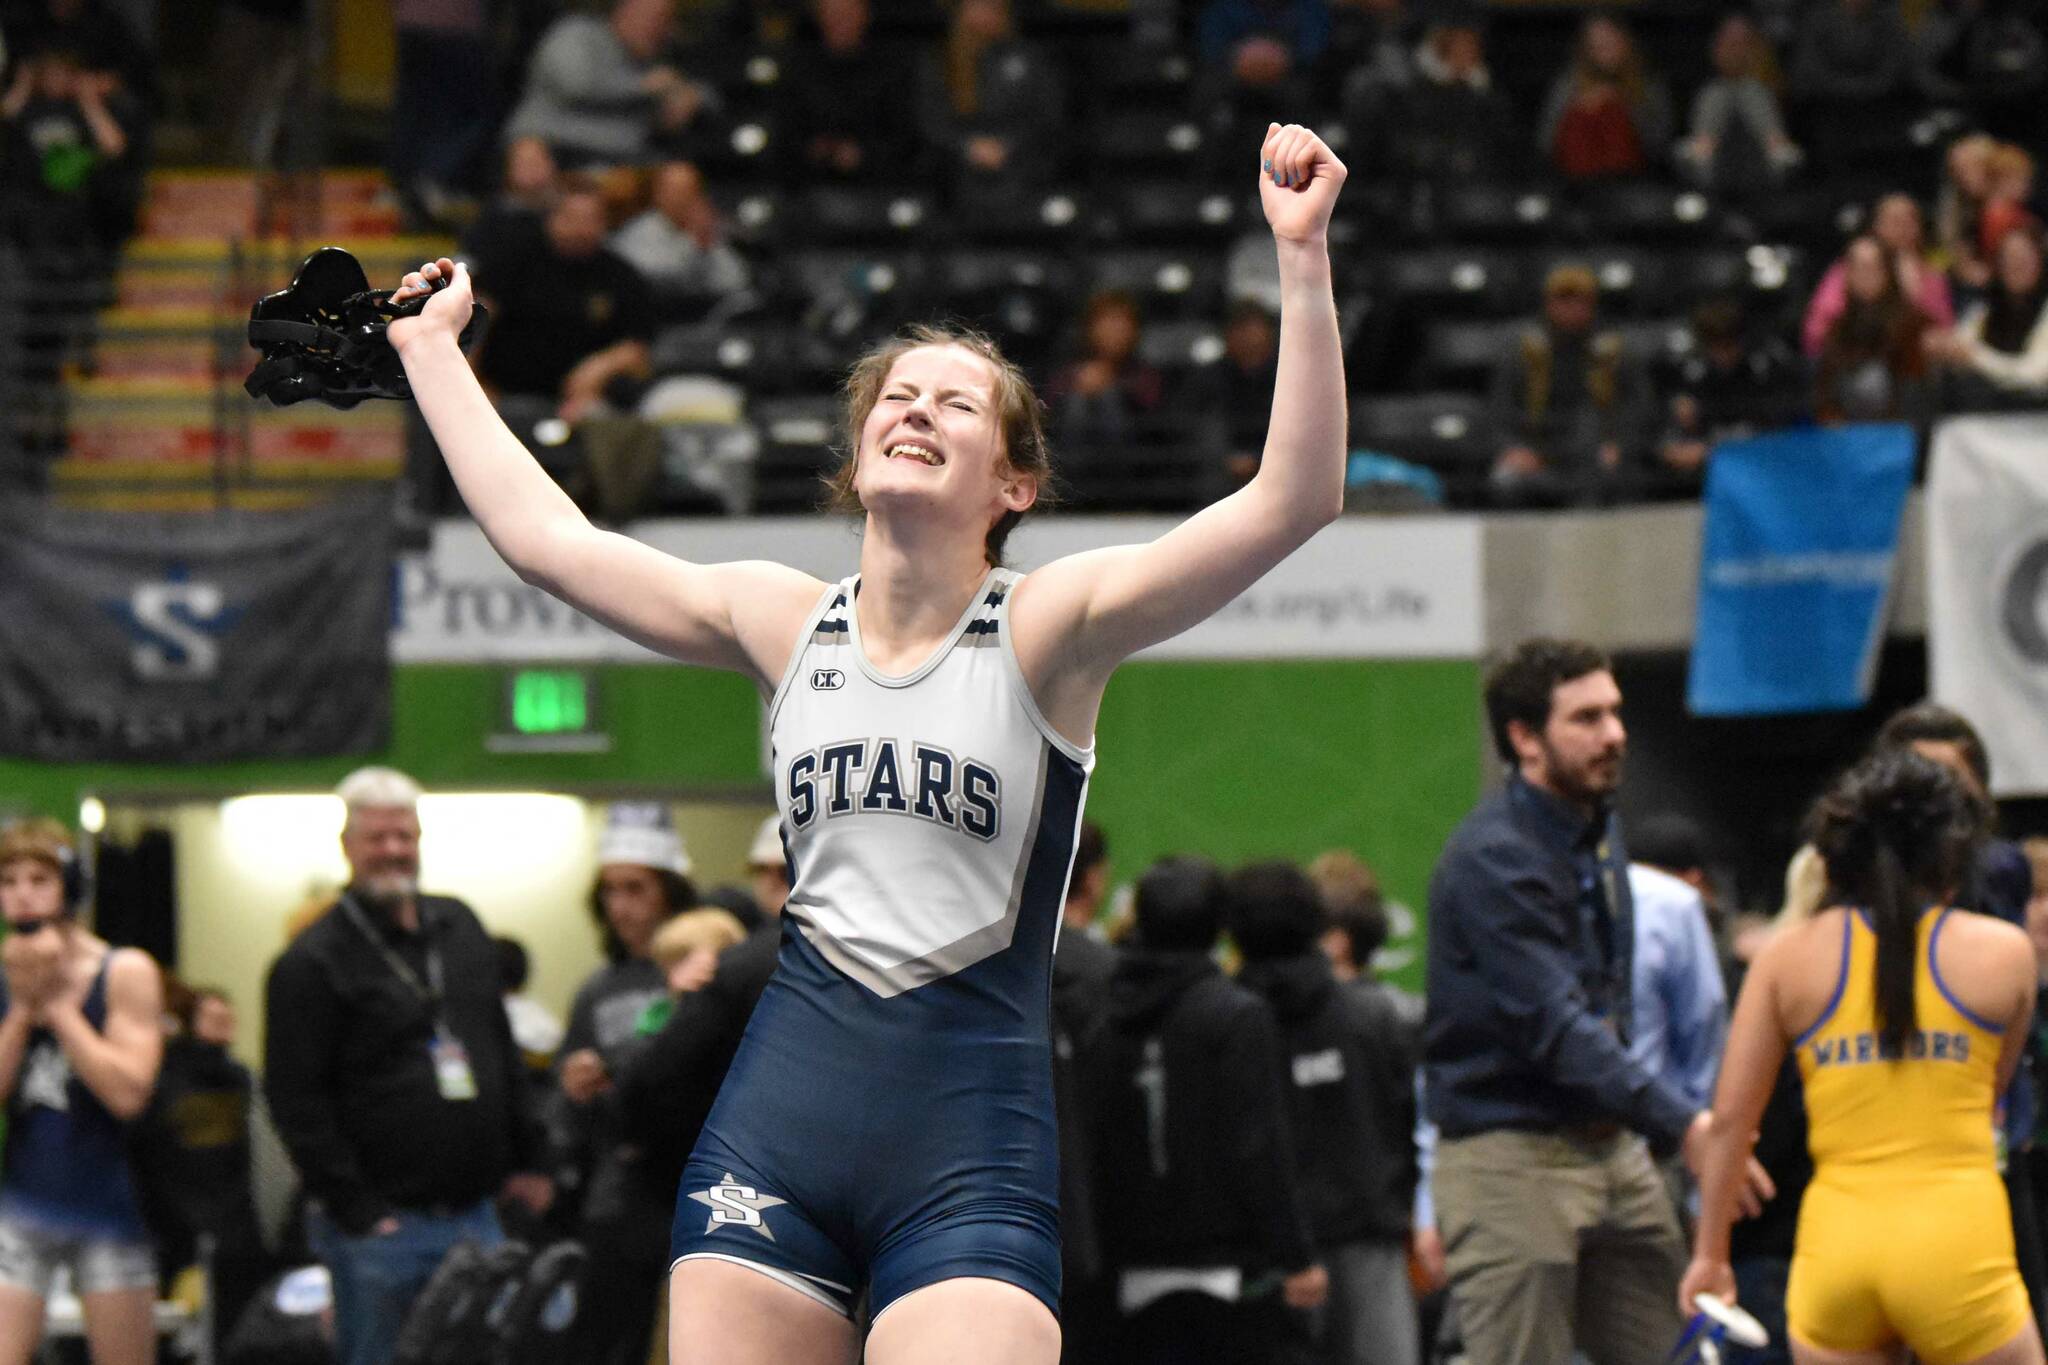 Soldotna's Kaytlin McAnelly celebrates winning the girls title at 132 pounds Saturday, Dec. 16, 2023, at the state wrestling tournament at the Alaska Airlines Center in Anchorage, Alaska. (Photo by Jeff Helminiak/Peninsula Clarion)